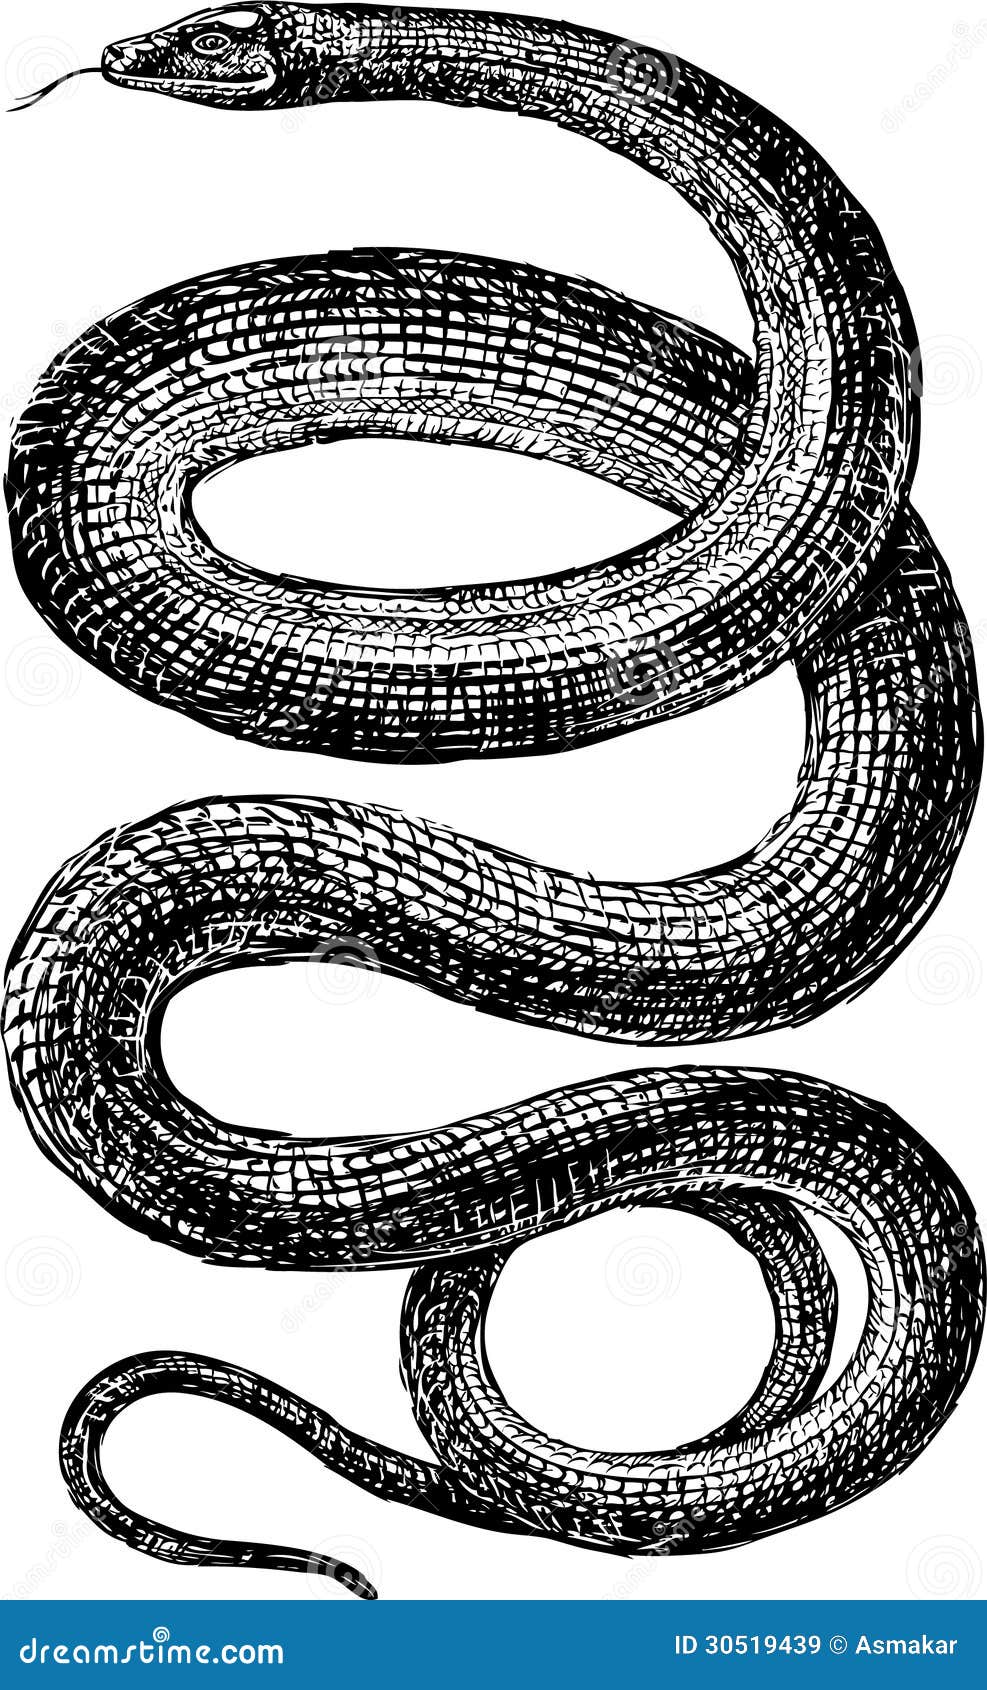 Snake stock vector. Illustration of animal, graphic, antique ...